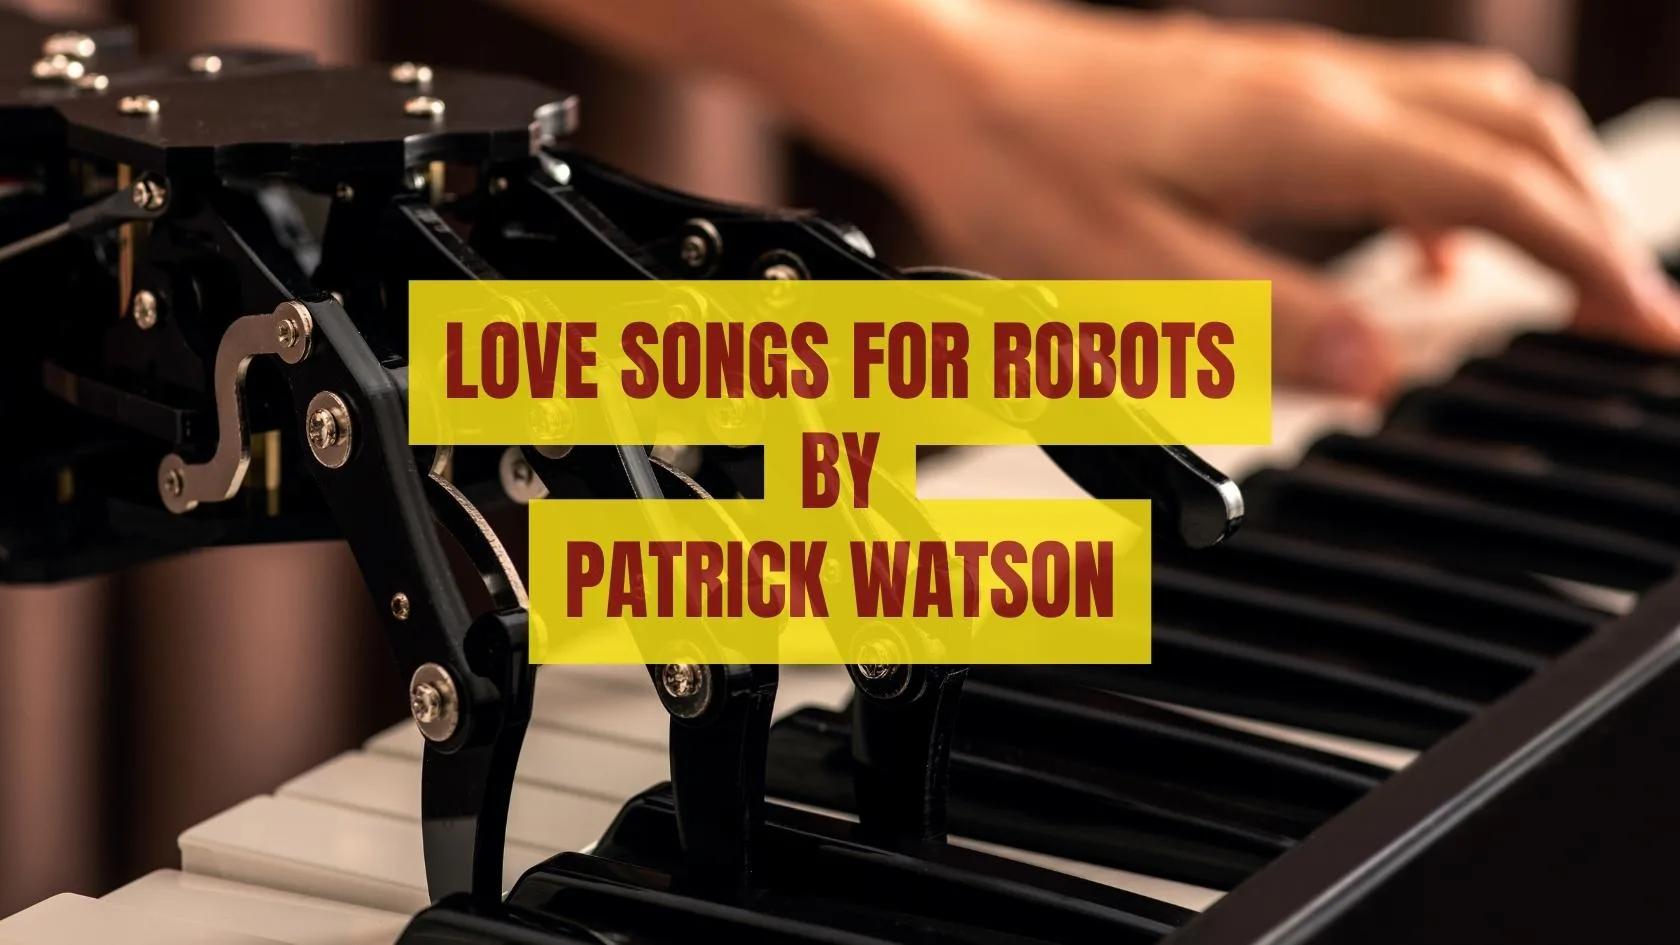 Love Songs for Robots by Patrick Watson